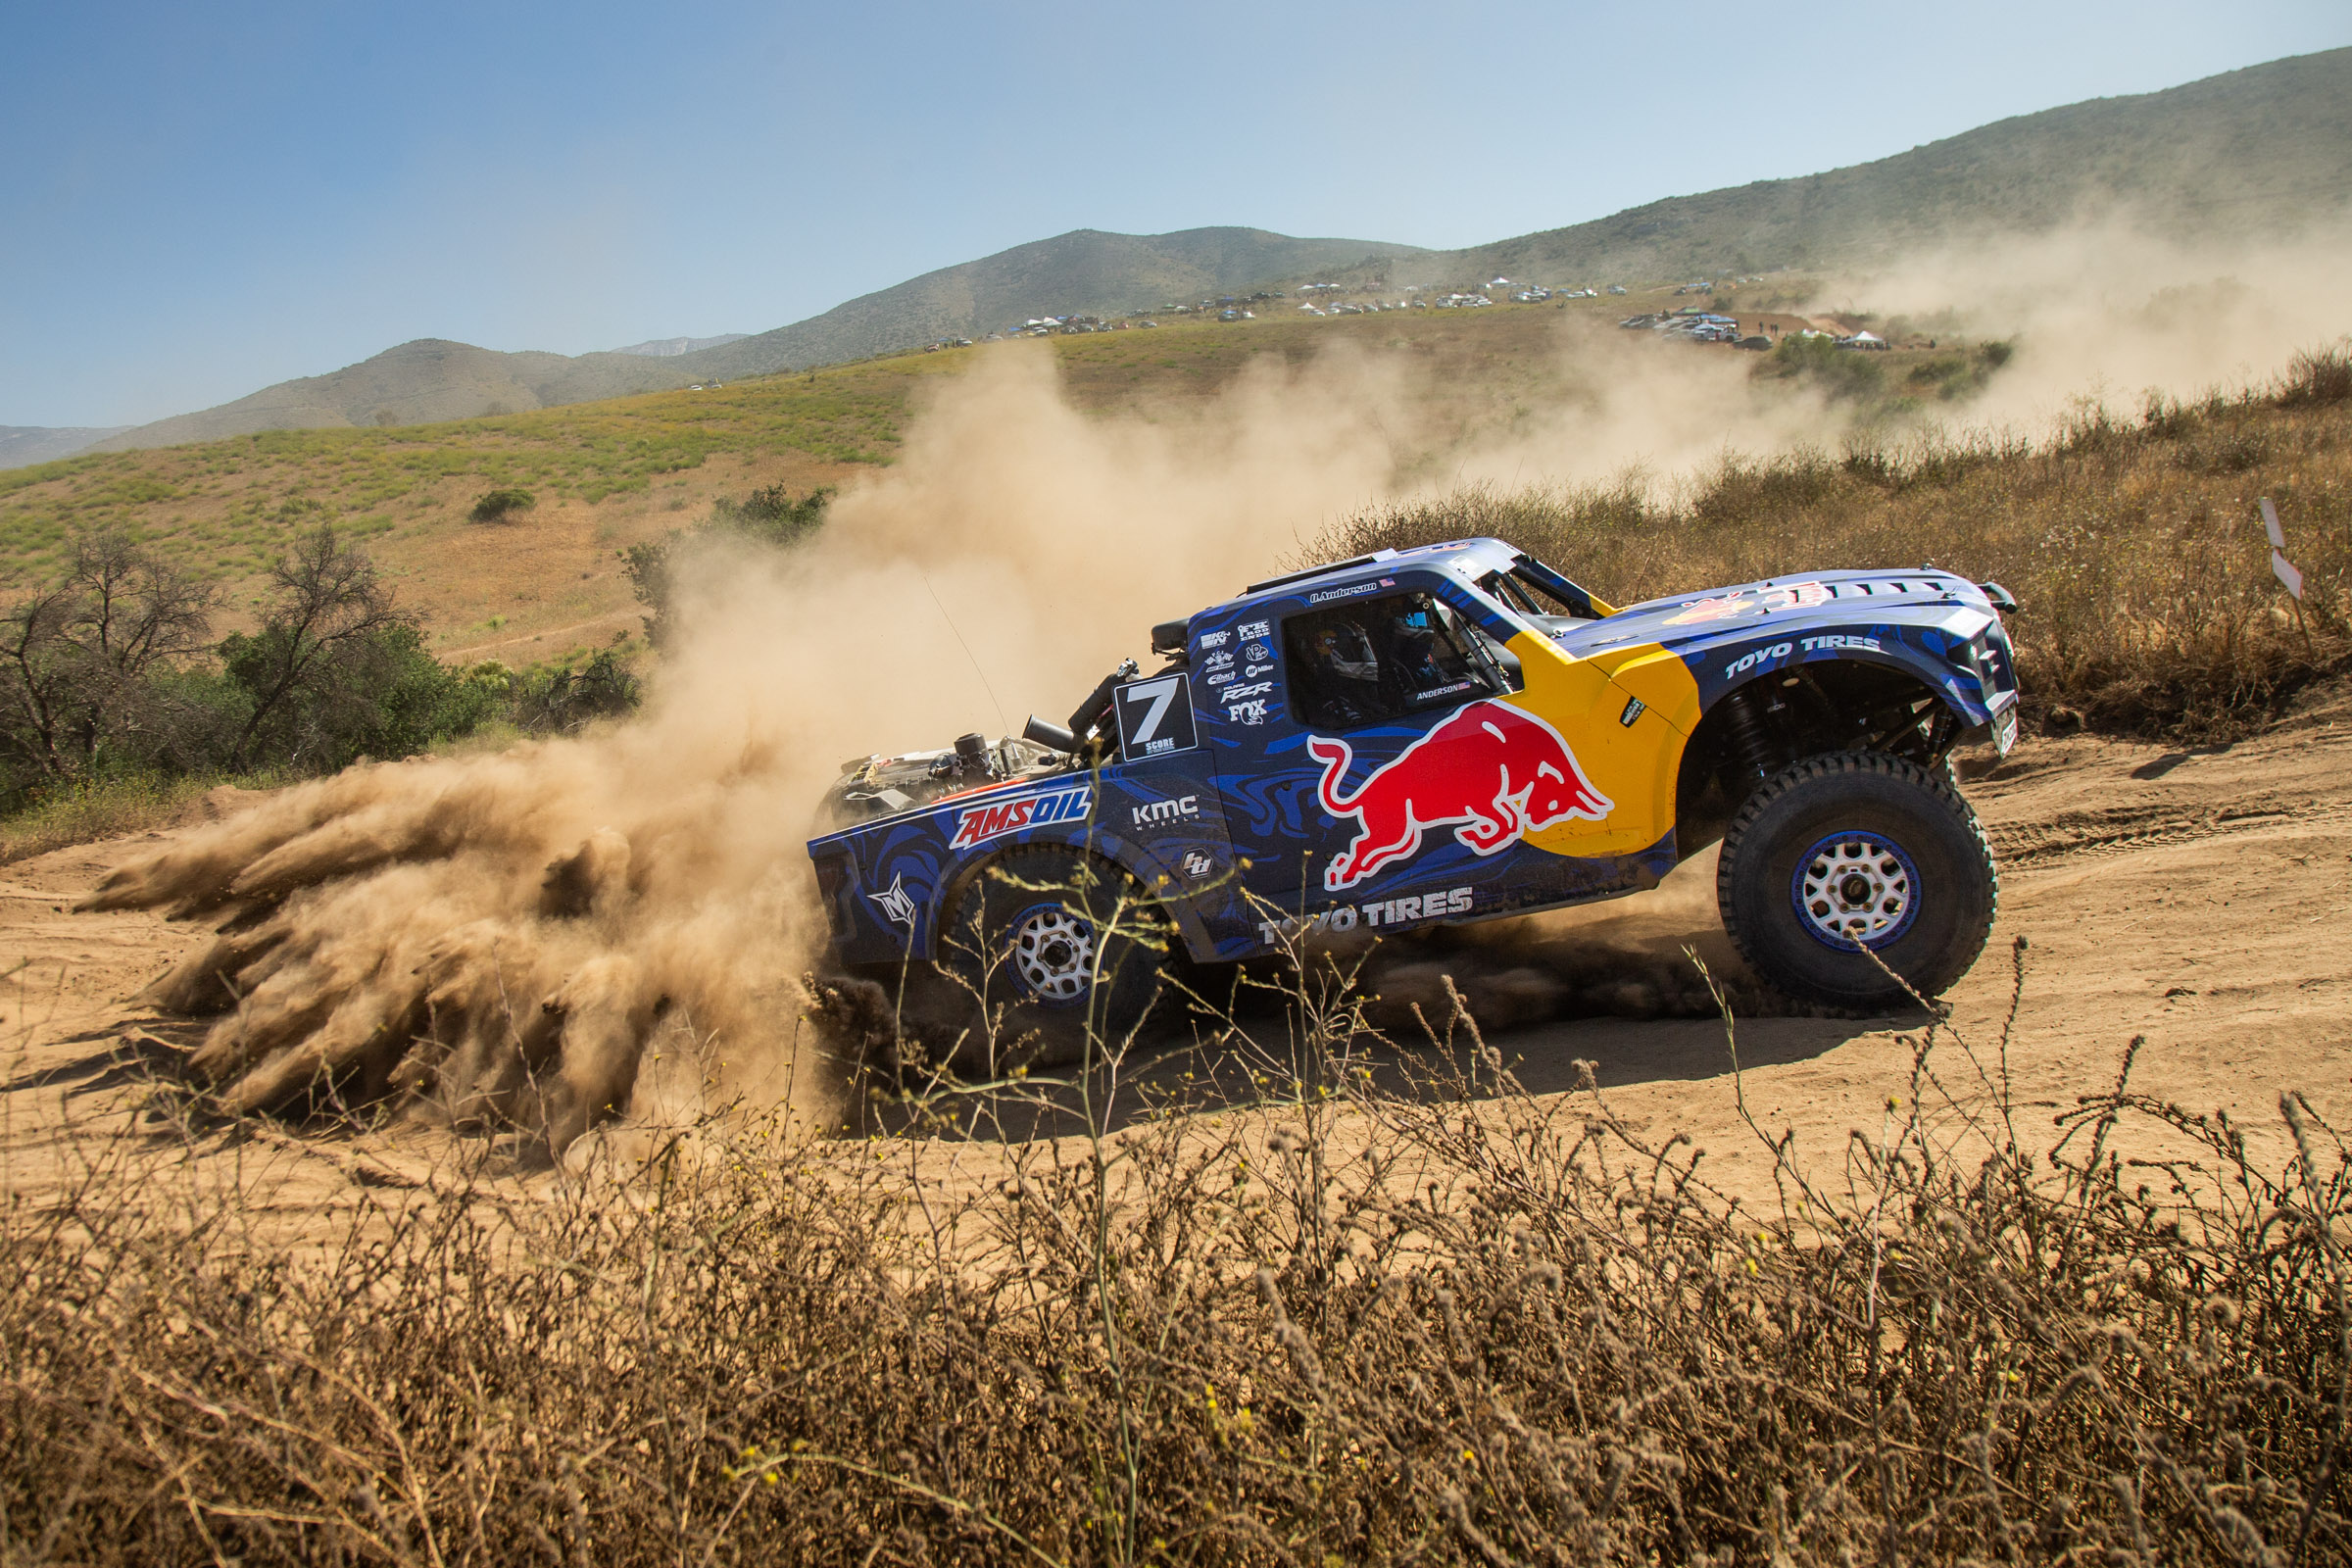 Menzies And Toyo Tires Team Win At Baja 500